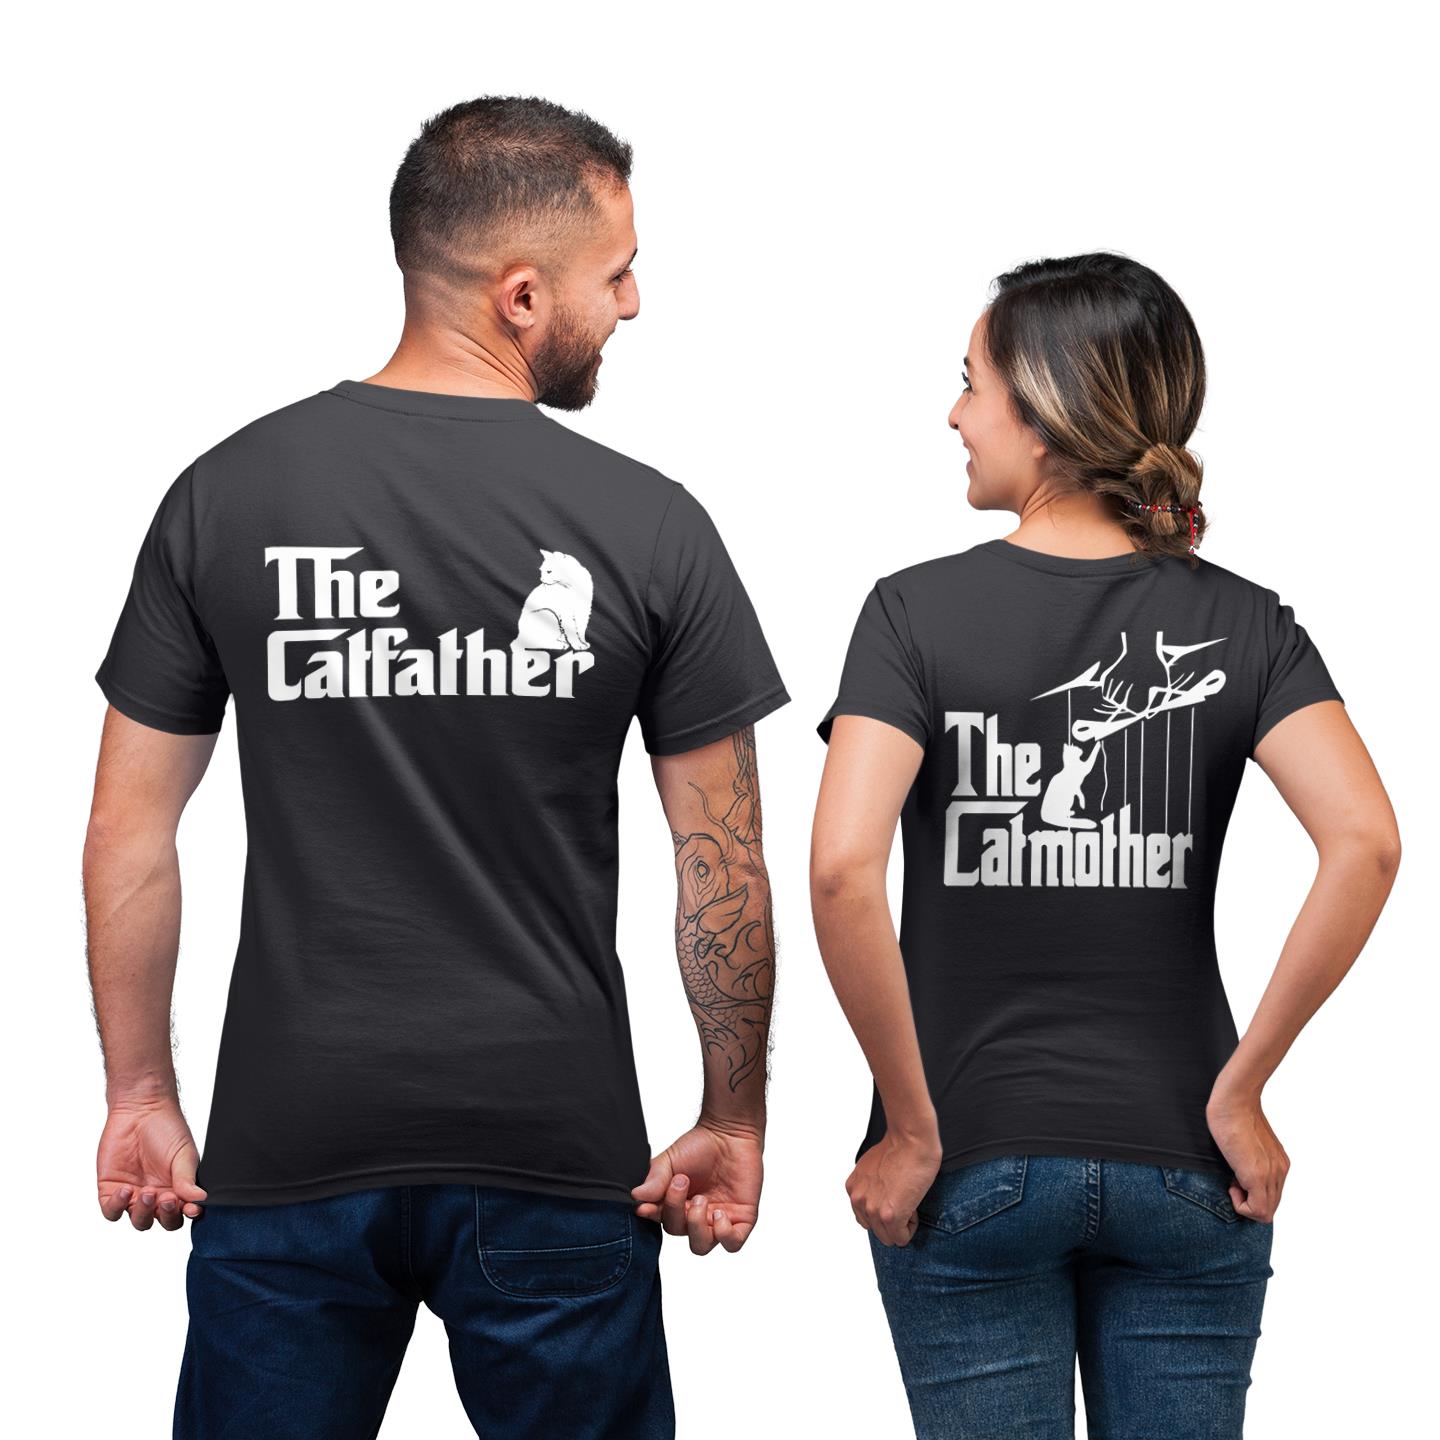 The Carfather Catmother His And Her Funny Shirt For Couples Lover Matching T-shirt